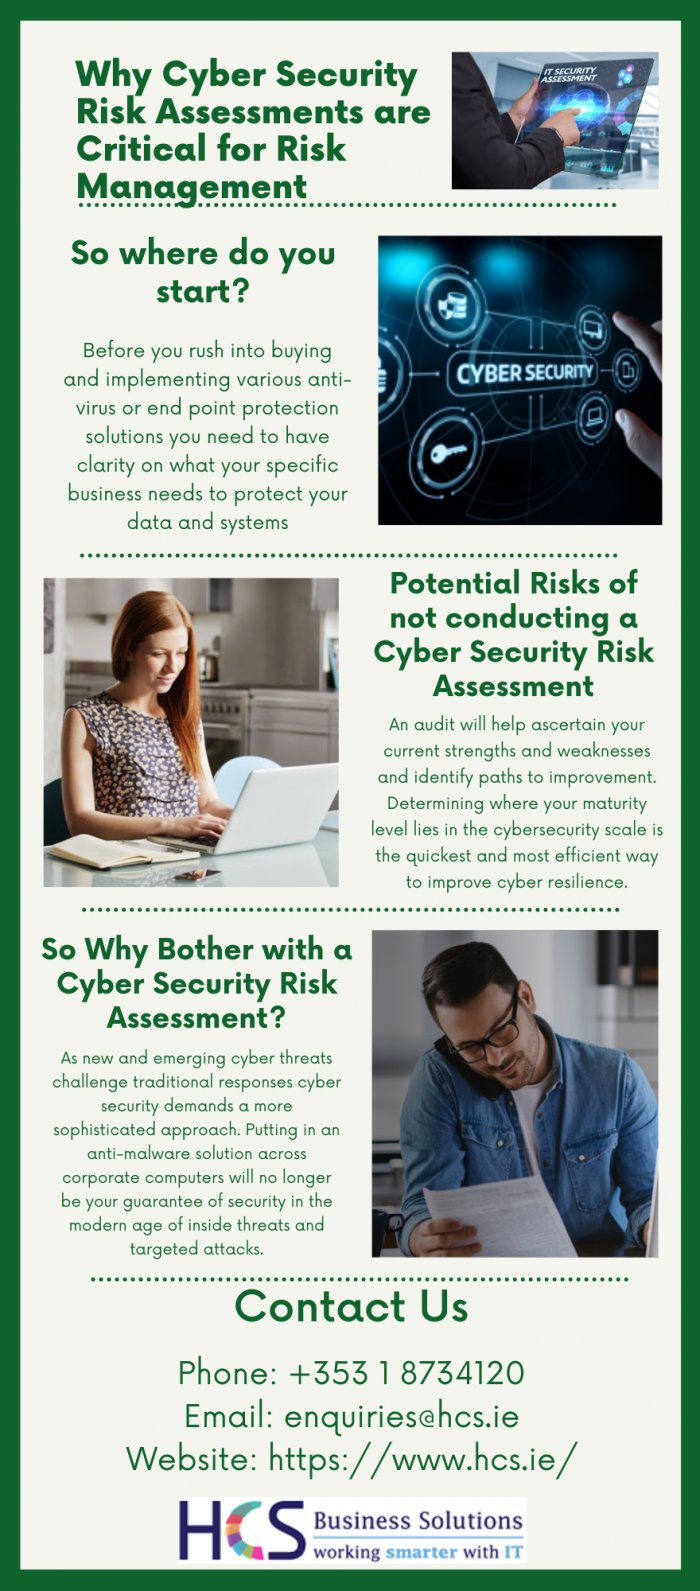 Why Cyber Security Risk Assessments are Critical for Risk Management